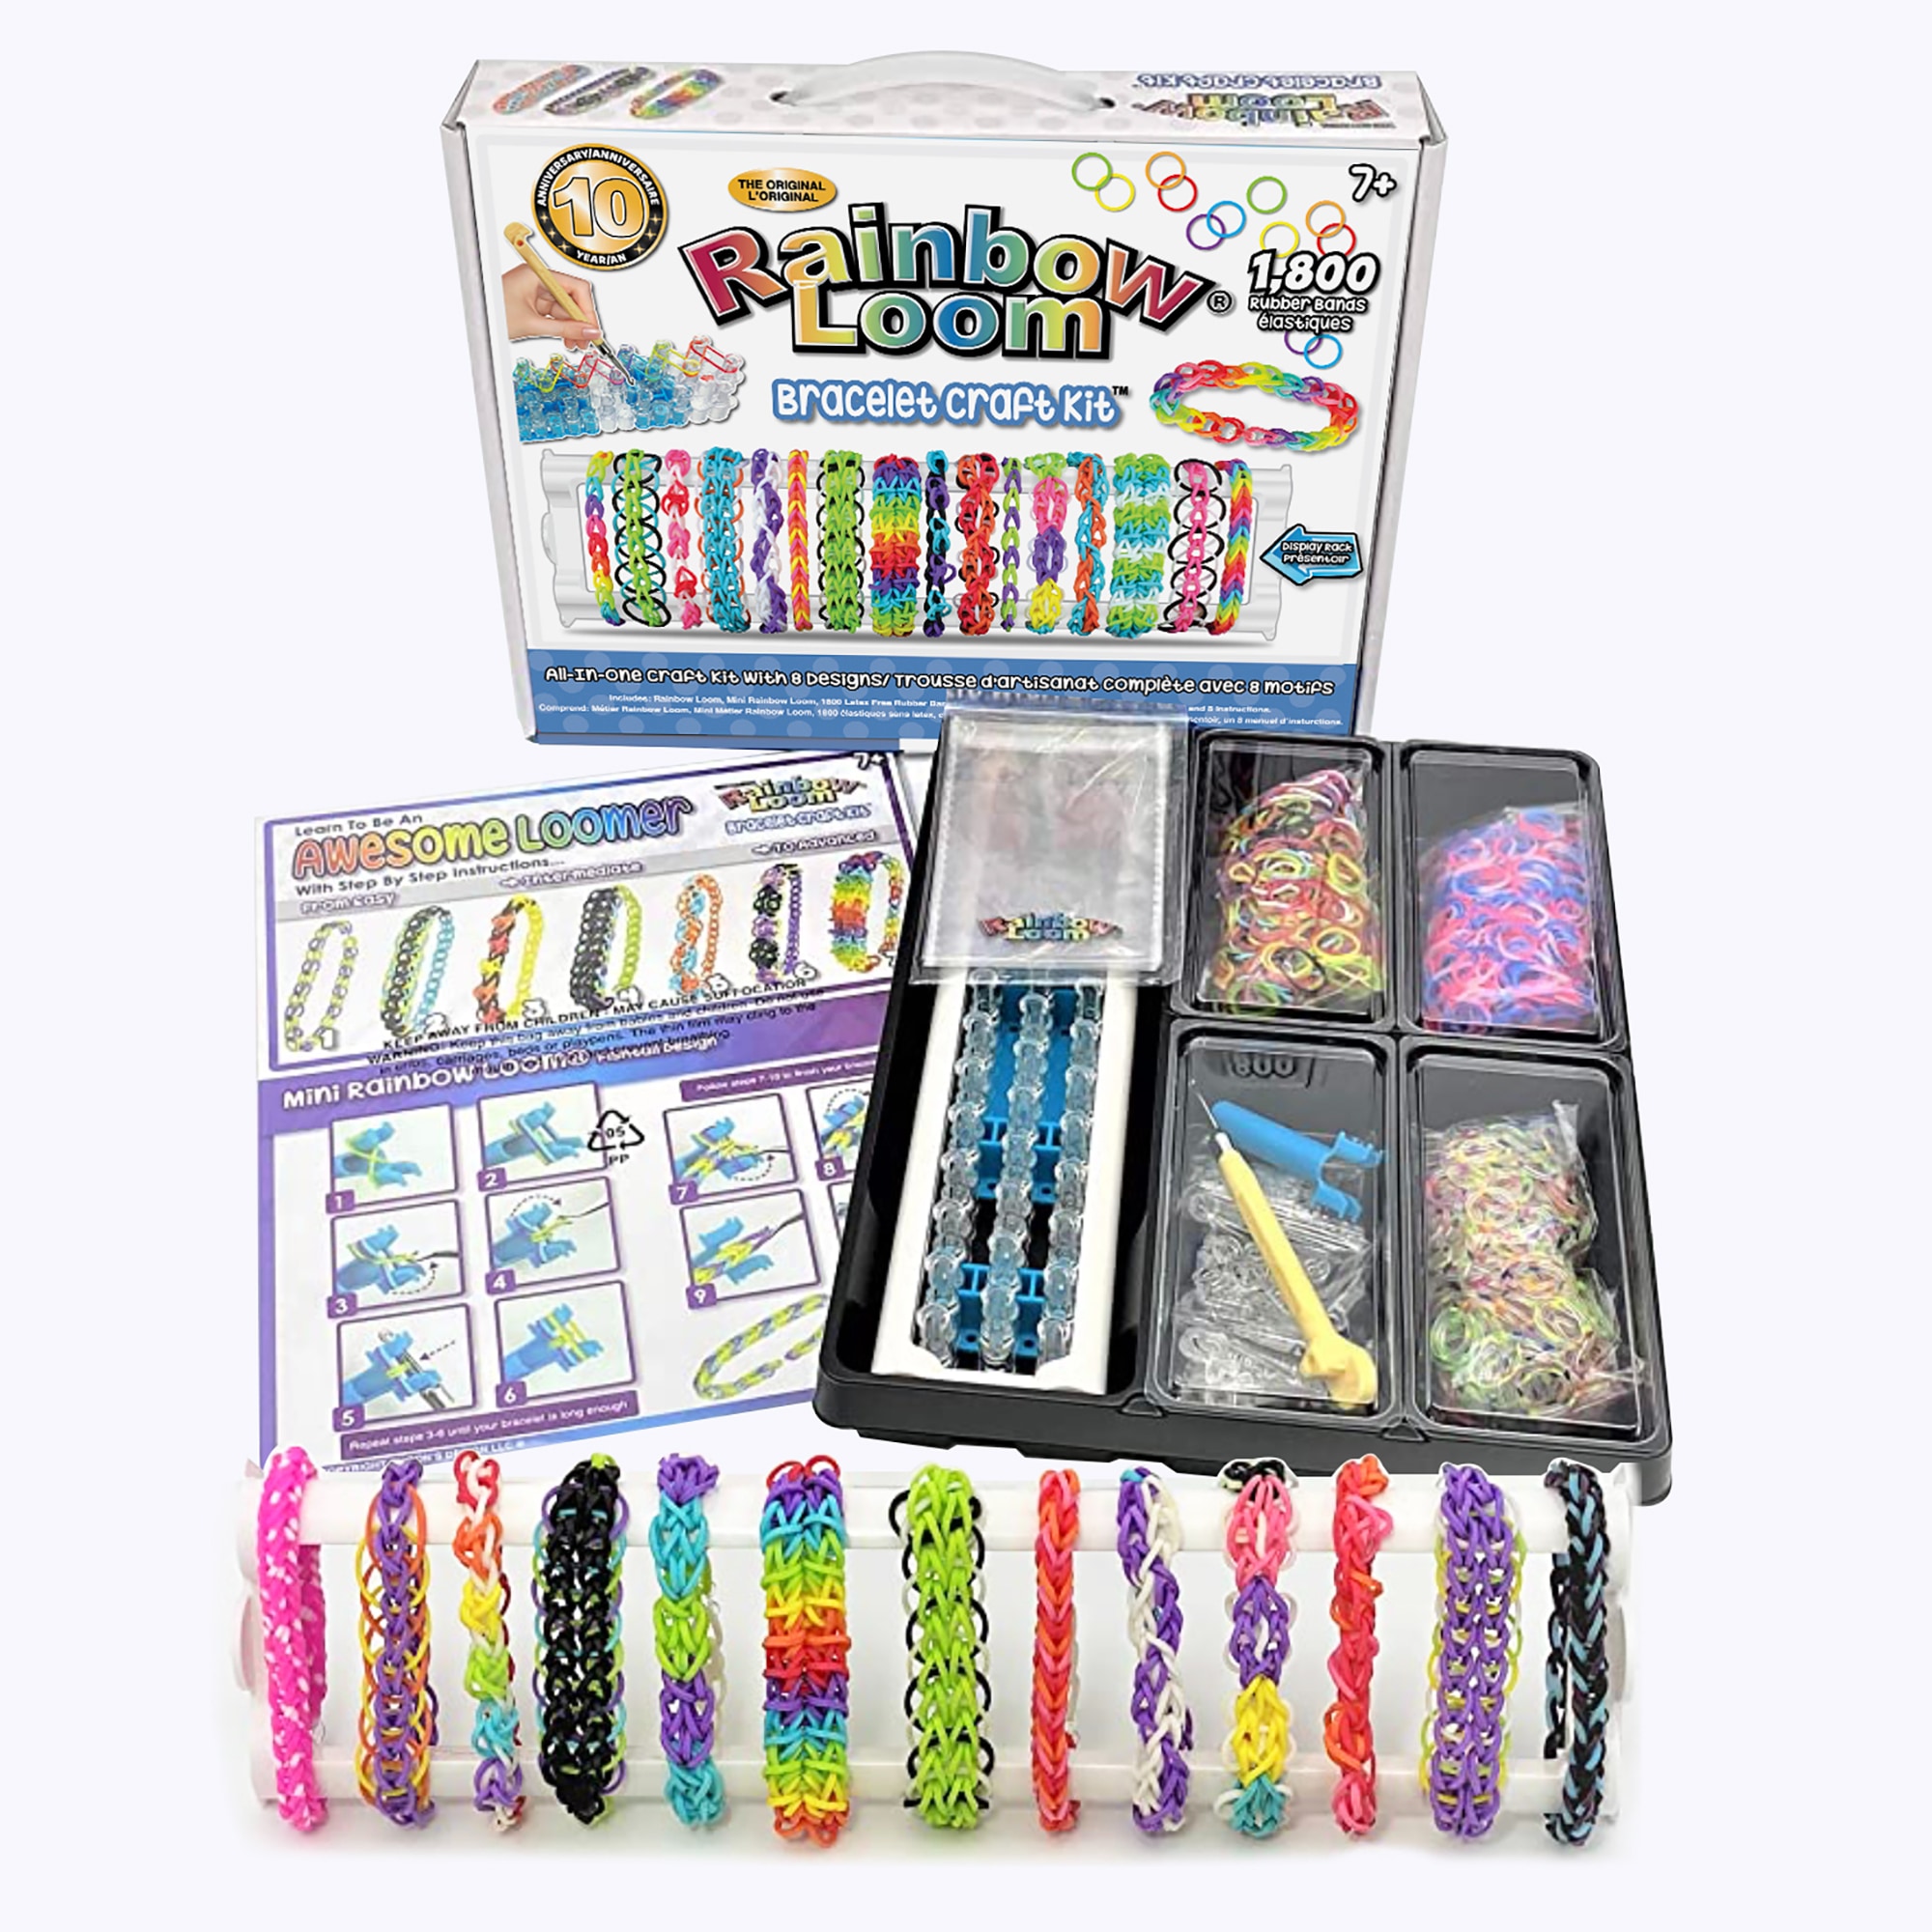 Rainbow Loom Bracelet Craft Kit - Creative Play Set with 1,800 Assorted  Rubber Bands and Metal Hook in the Kids Play Toys department at